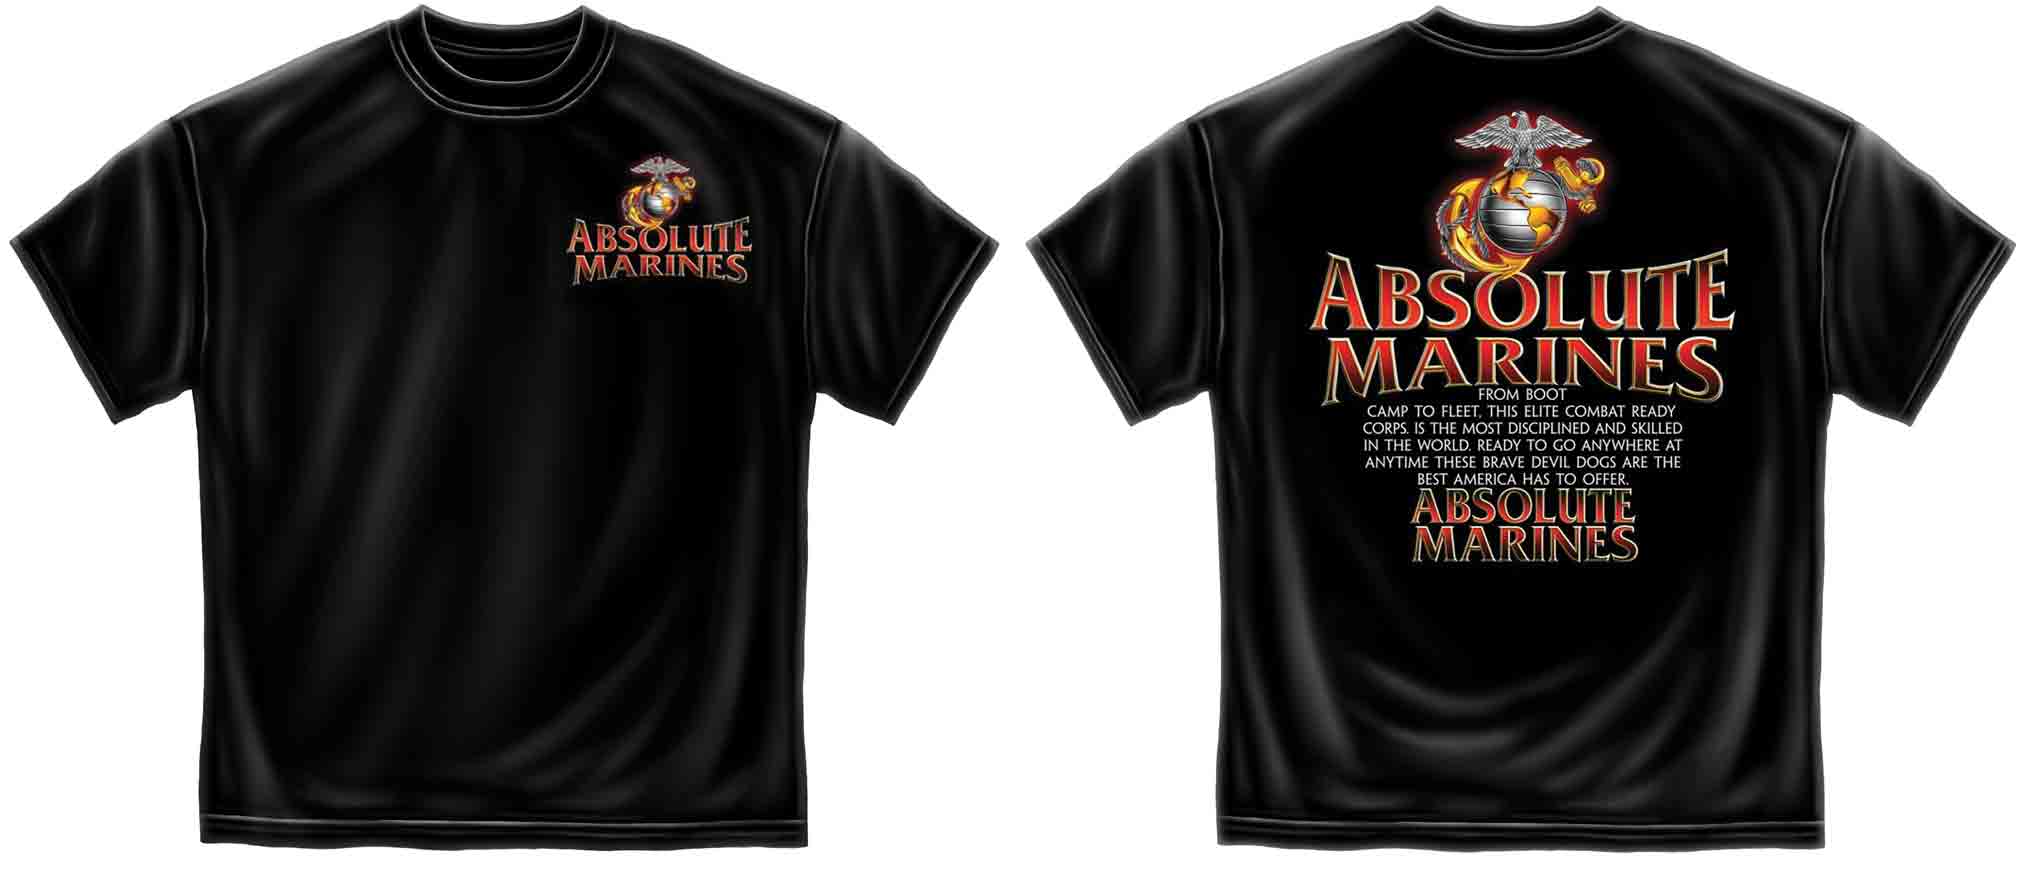 ABSOLUTE MARINES 100% COTTON TEES